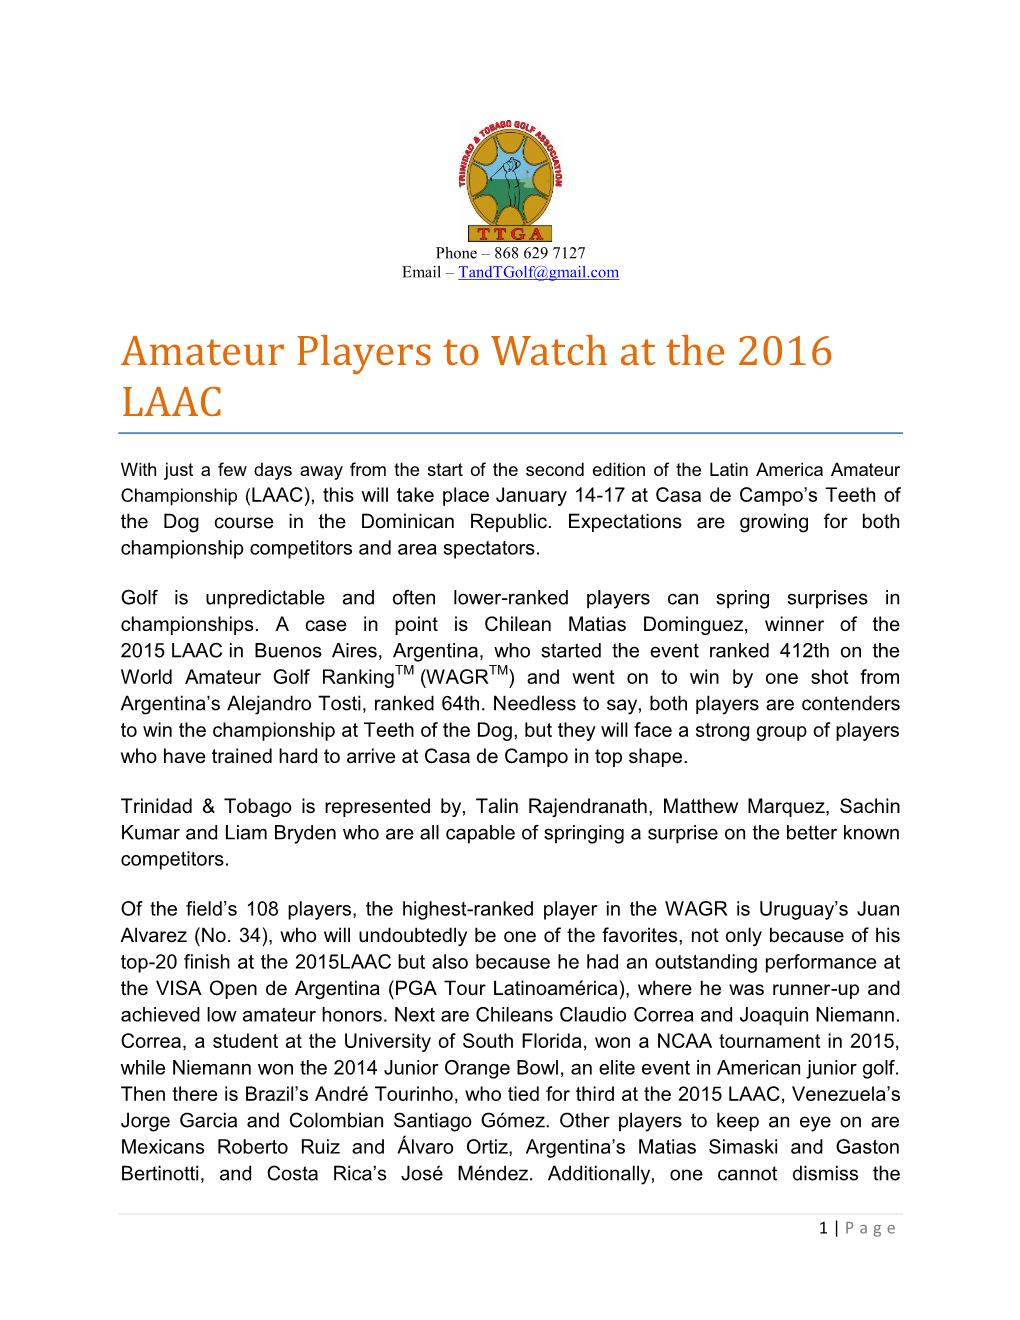 Amateur Players to Watch at the 2016 LAAC